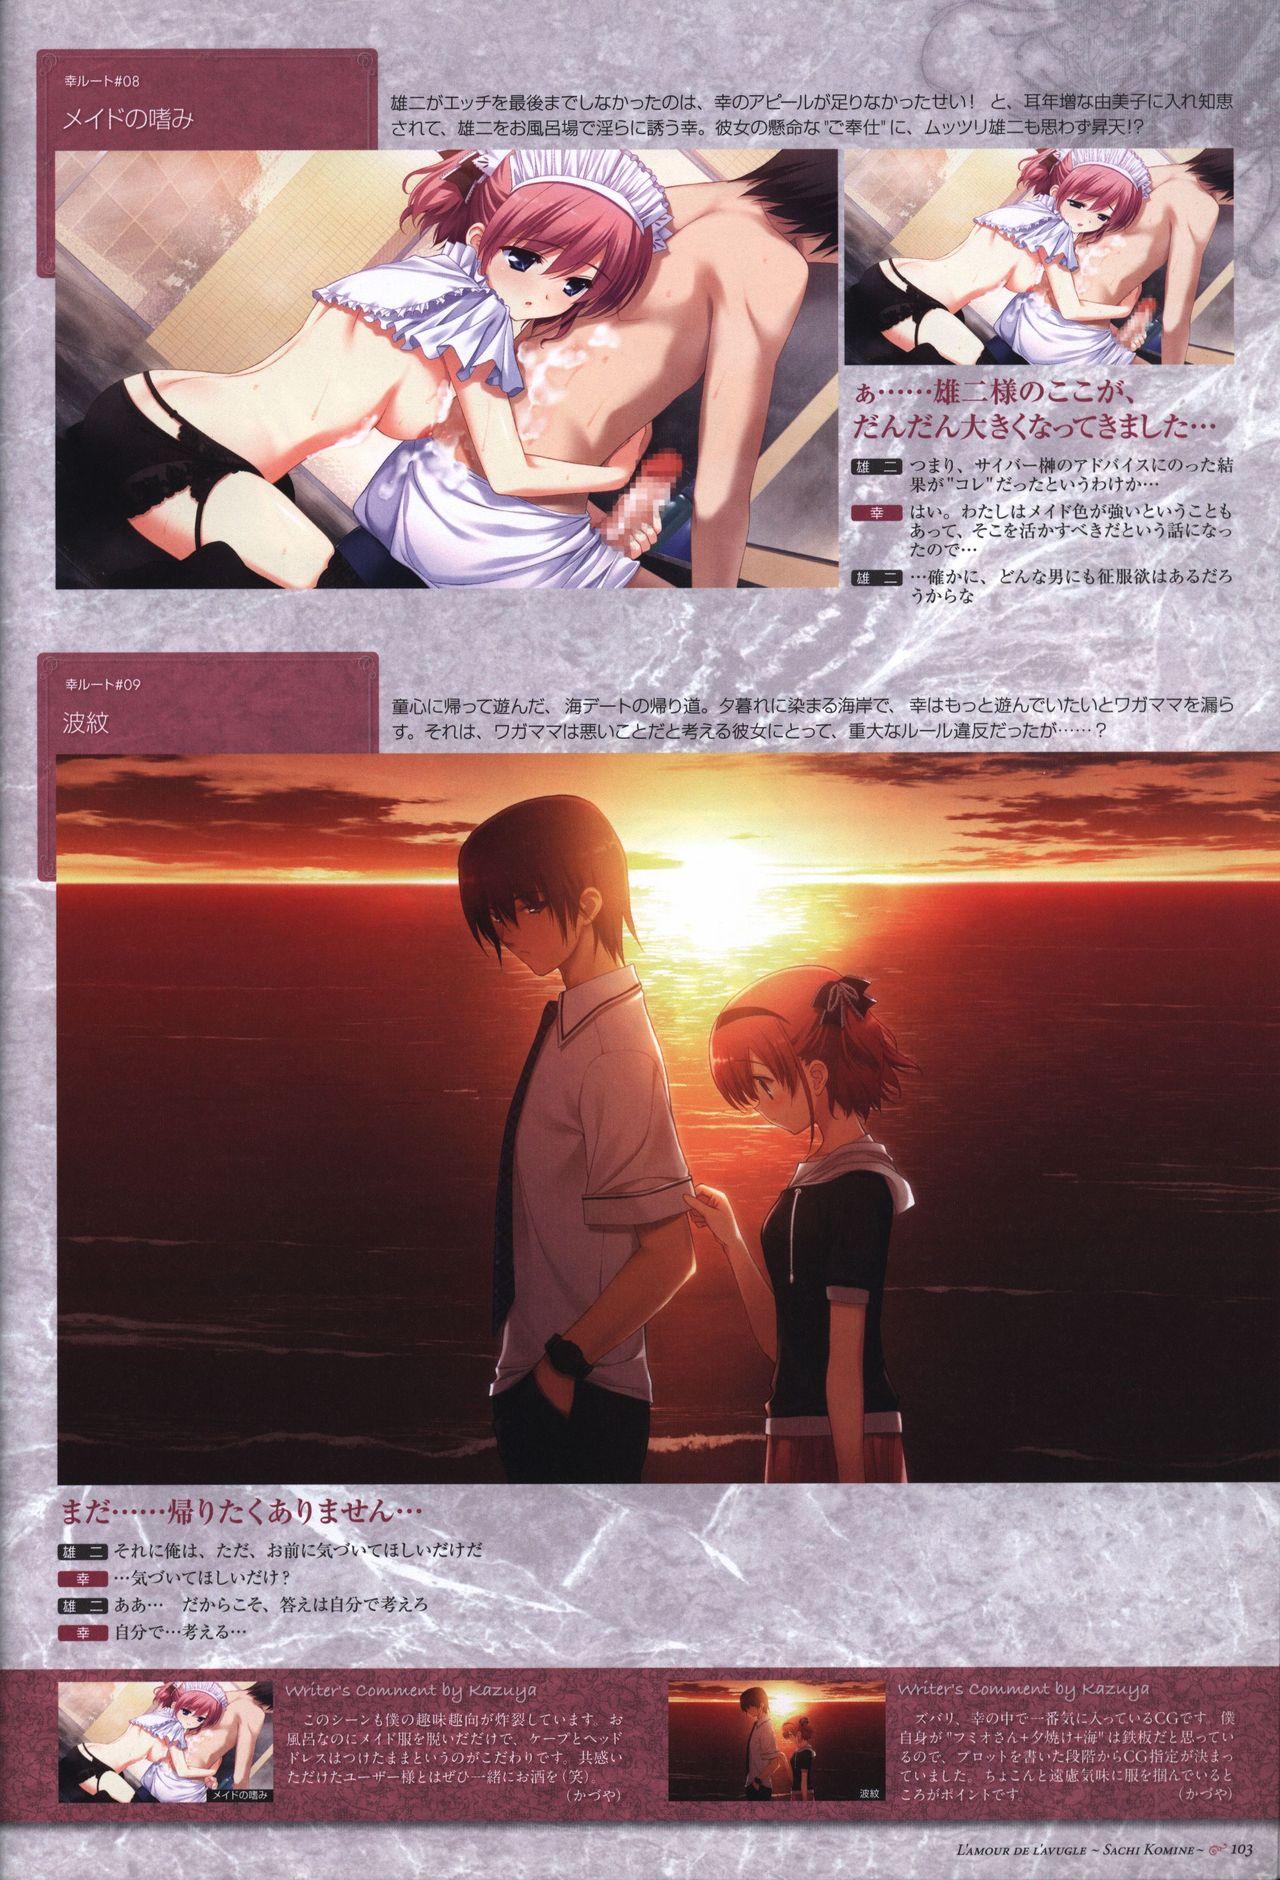 The Fruit of Grisaia Visual FanBook 103